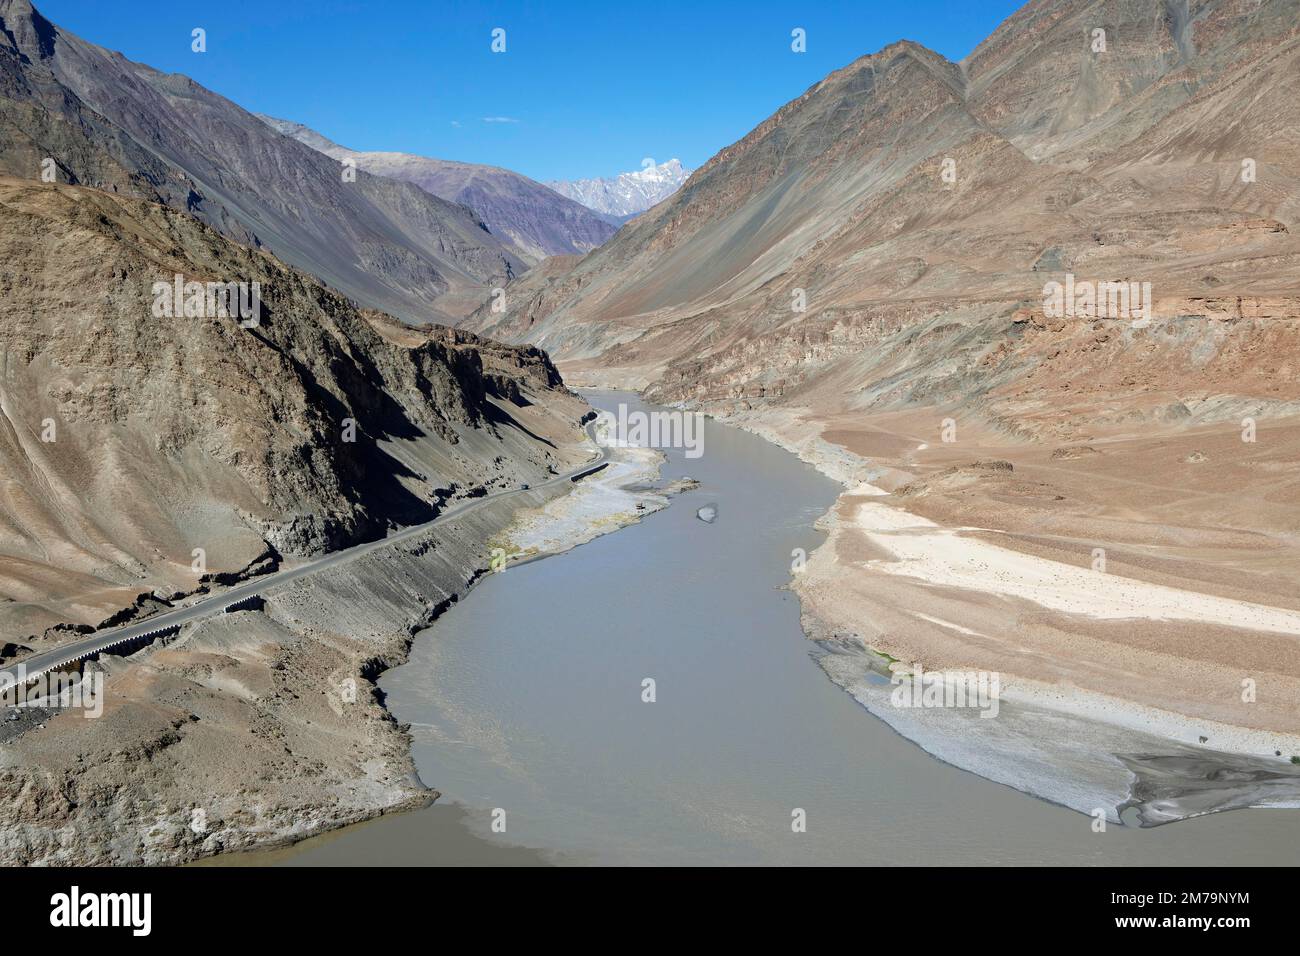 Confluence of the Indus and Zanskar Rivers in the Himalayas, Indus Valley, Ladakh, India Stock Photo